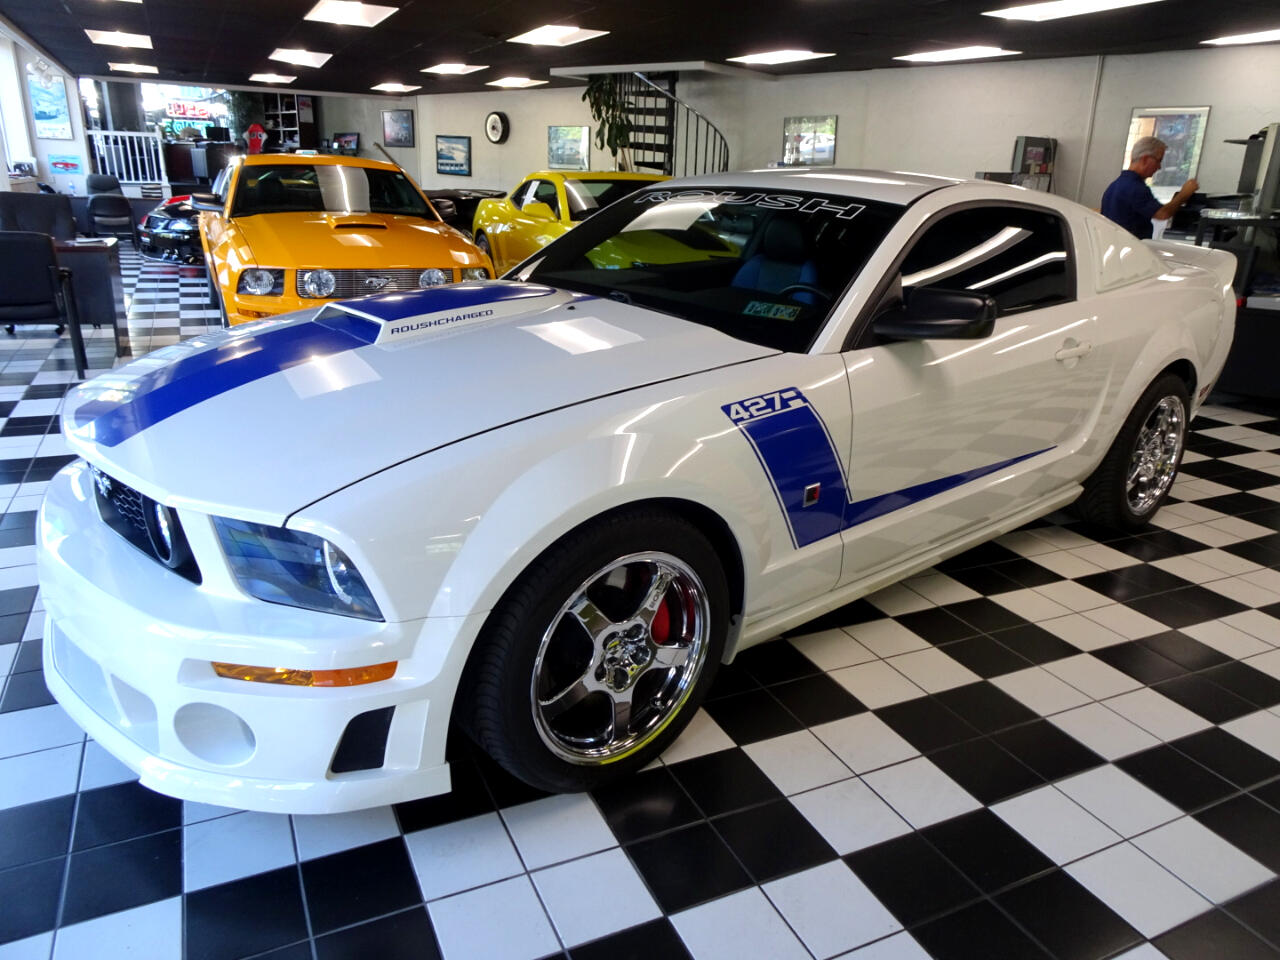 Ford Mustang GT Premium Coupe 2007